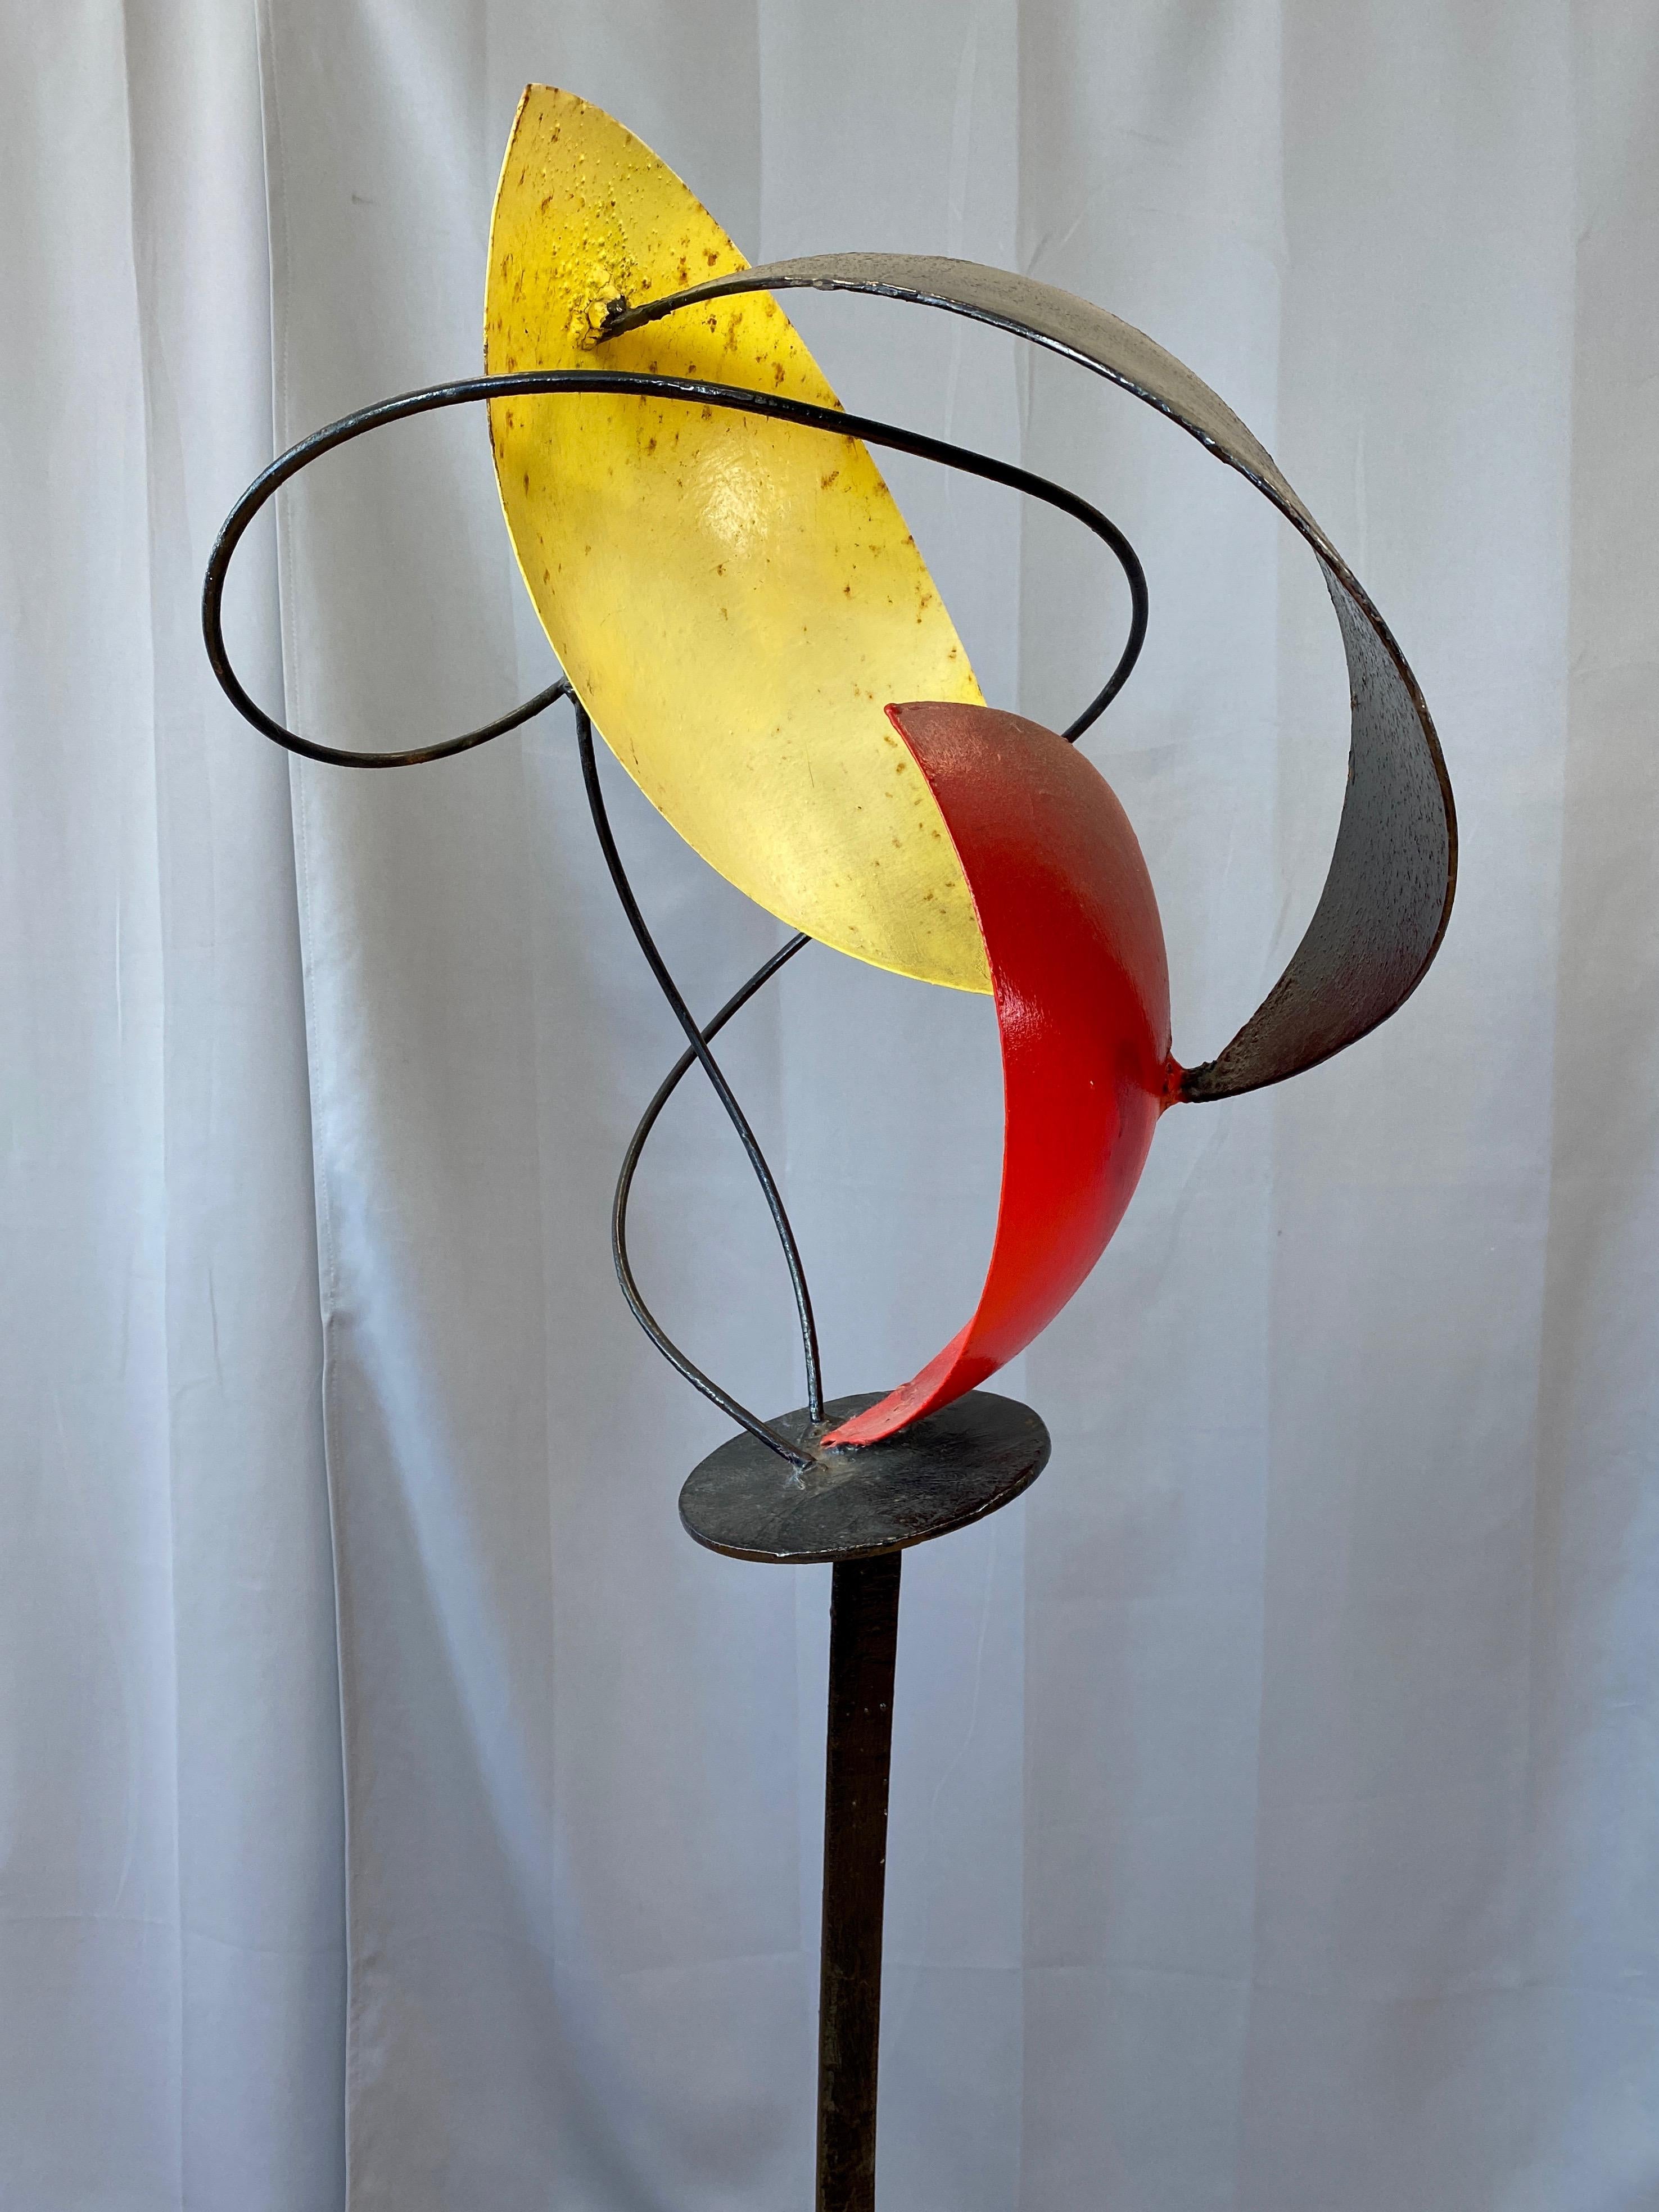 Béla Harcos Tall Abstract Expressionist Enameled Steel Sculpture, Late 1990s For Sale 1